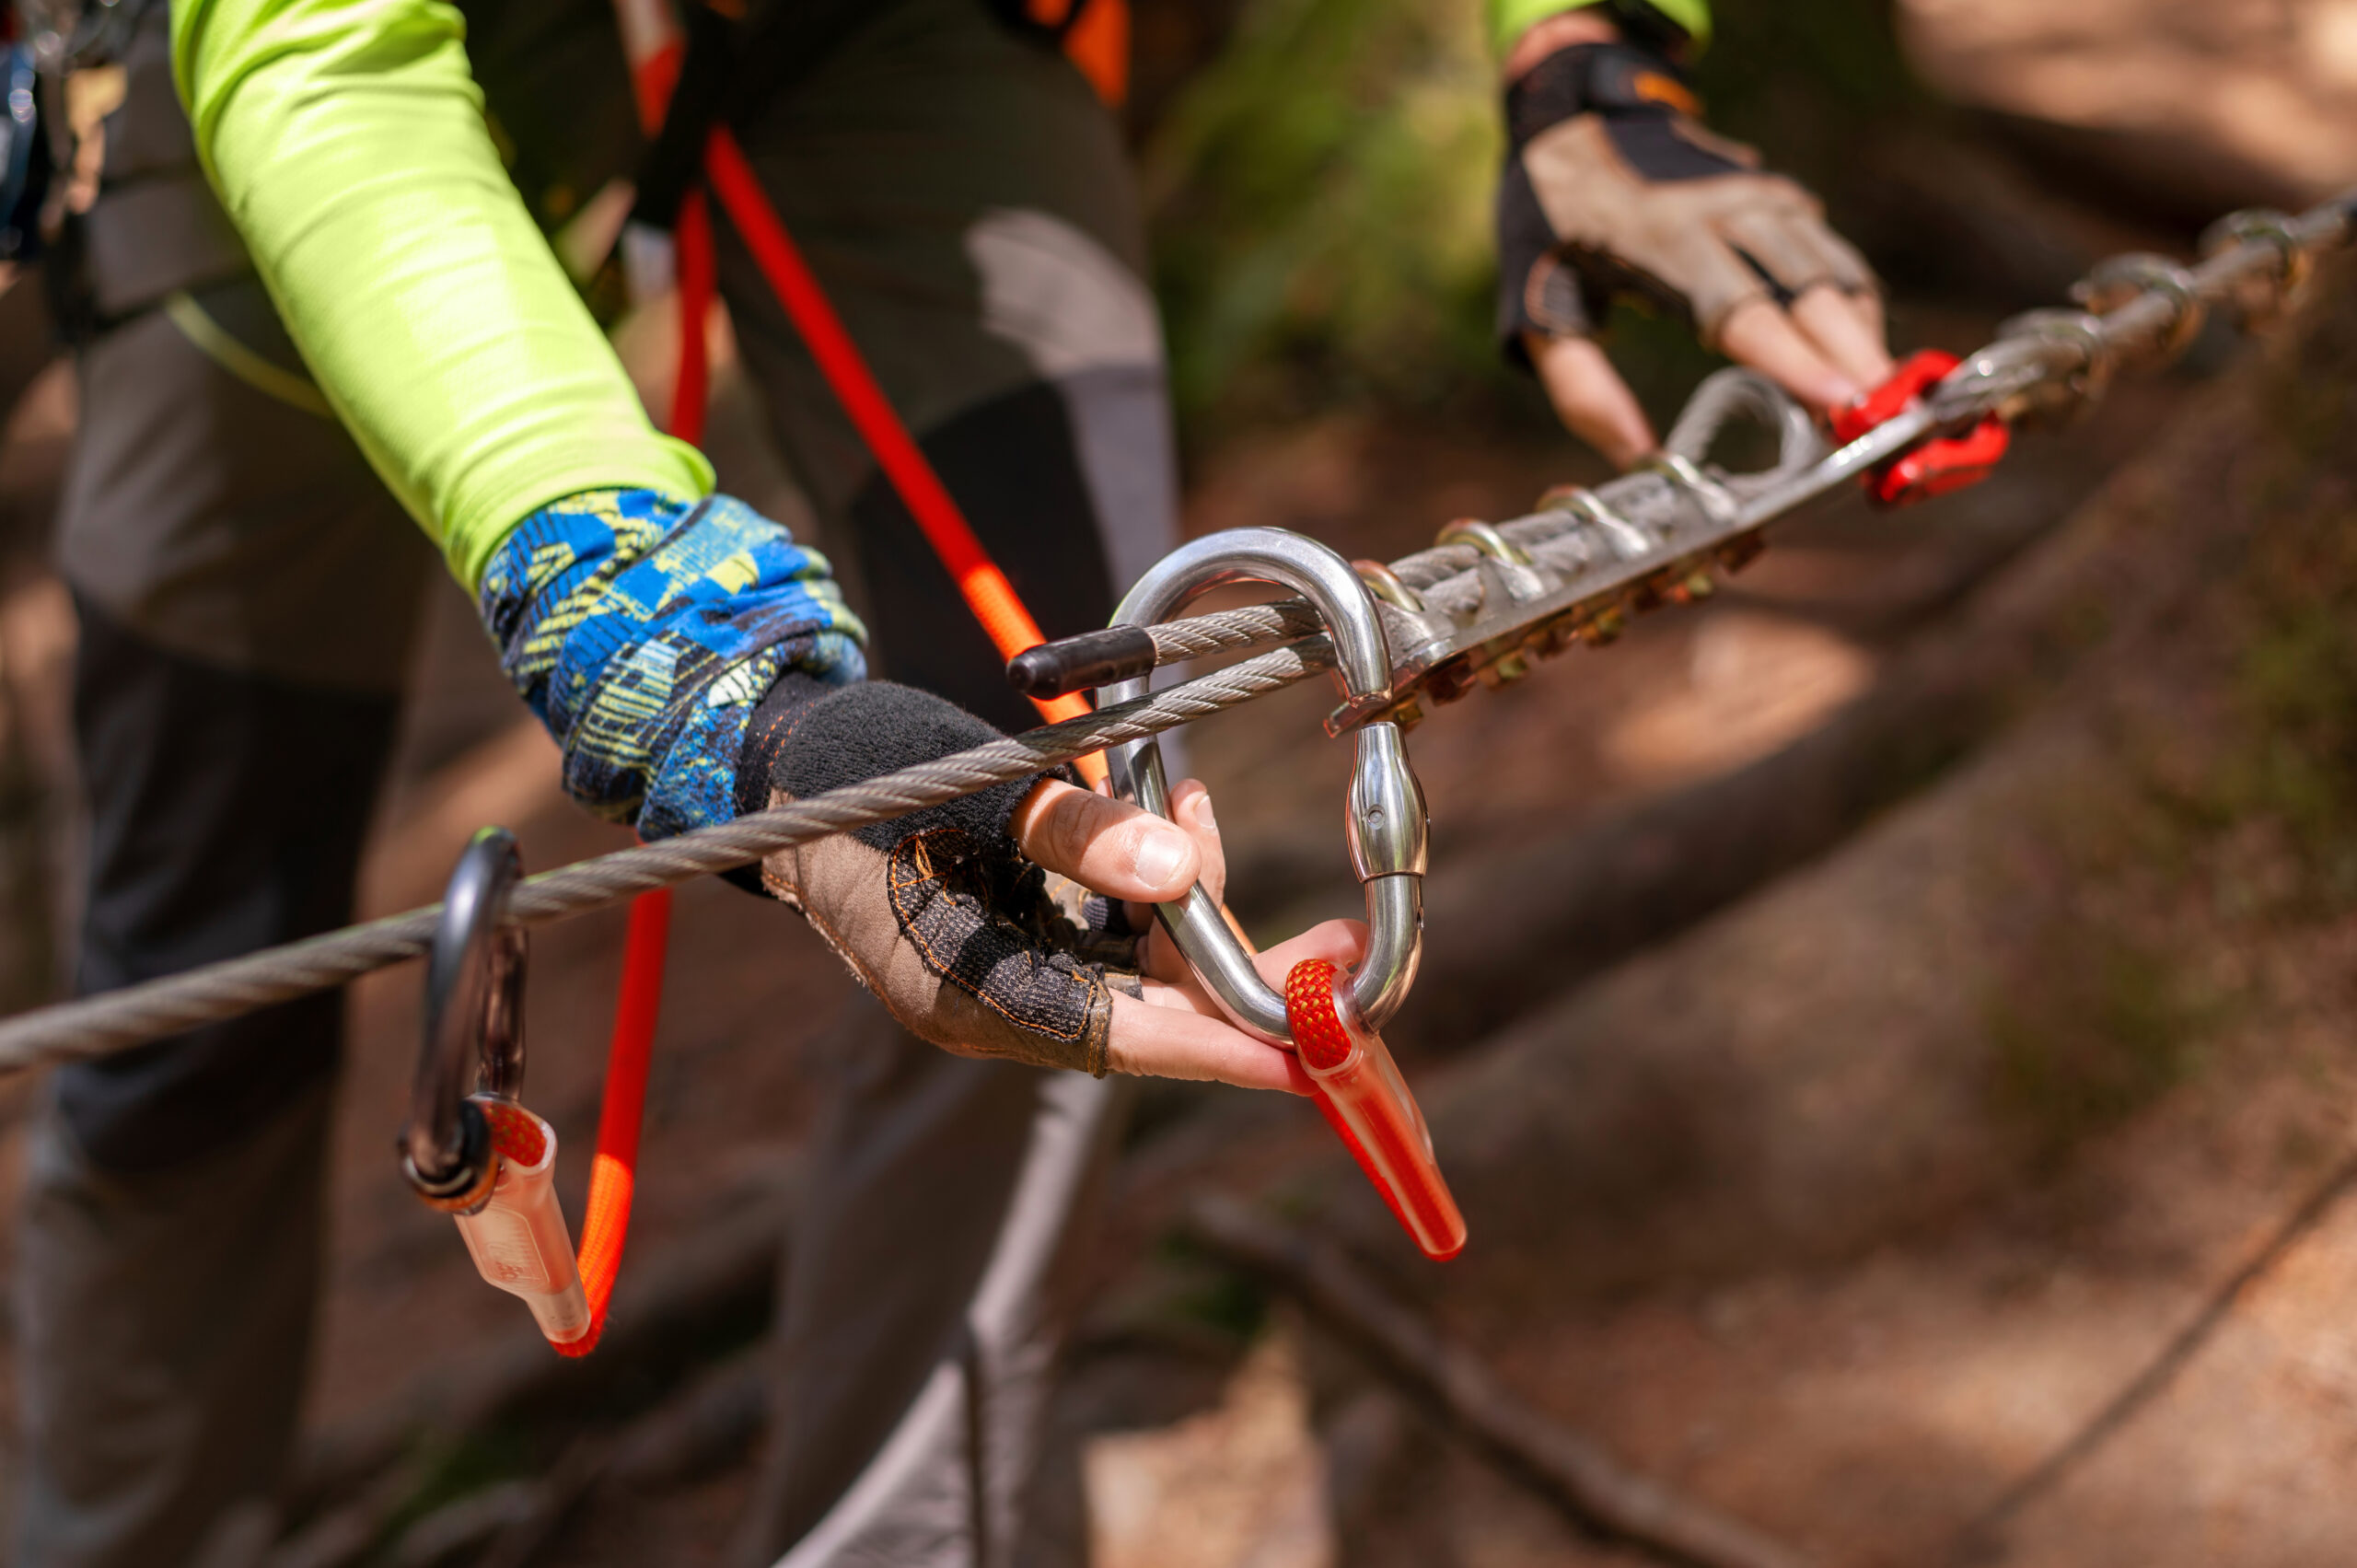 A close-up of a person's gloved hands holding a rappelling device and attaching it to their harness using a carabiner.